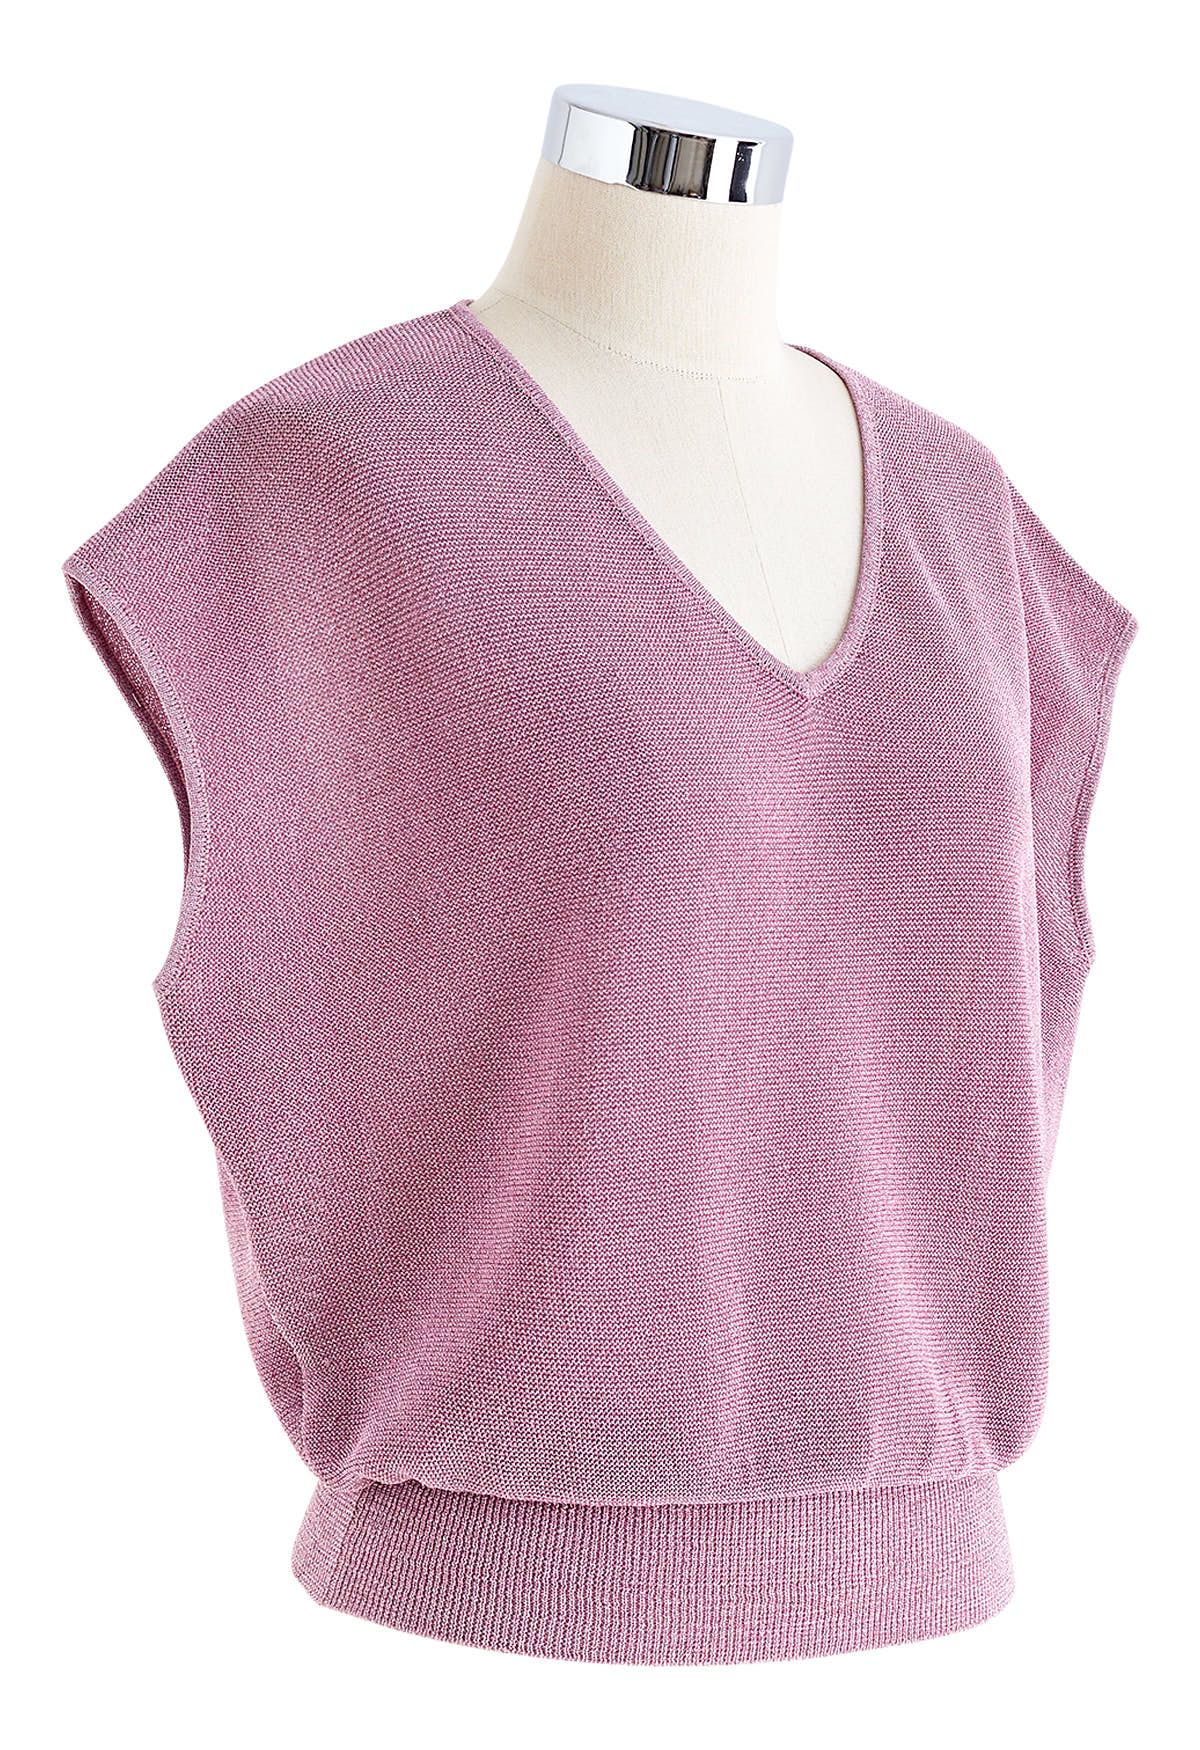 Glimmer Knit V-Neck Sleeveless Top in Lilac